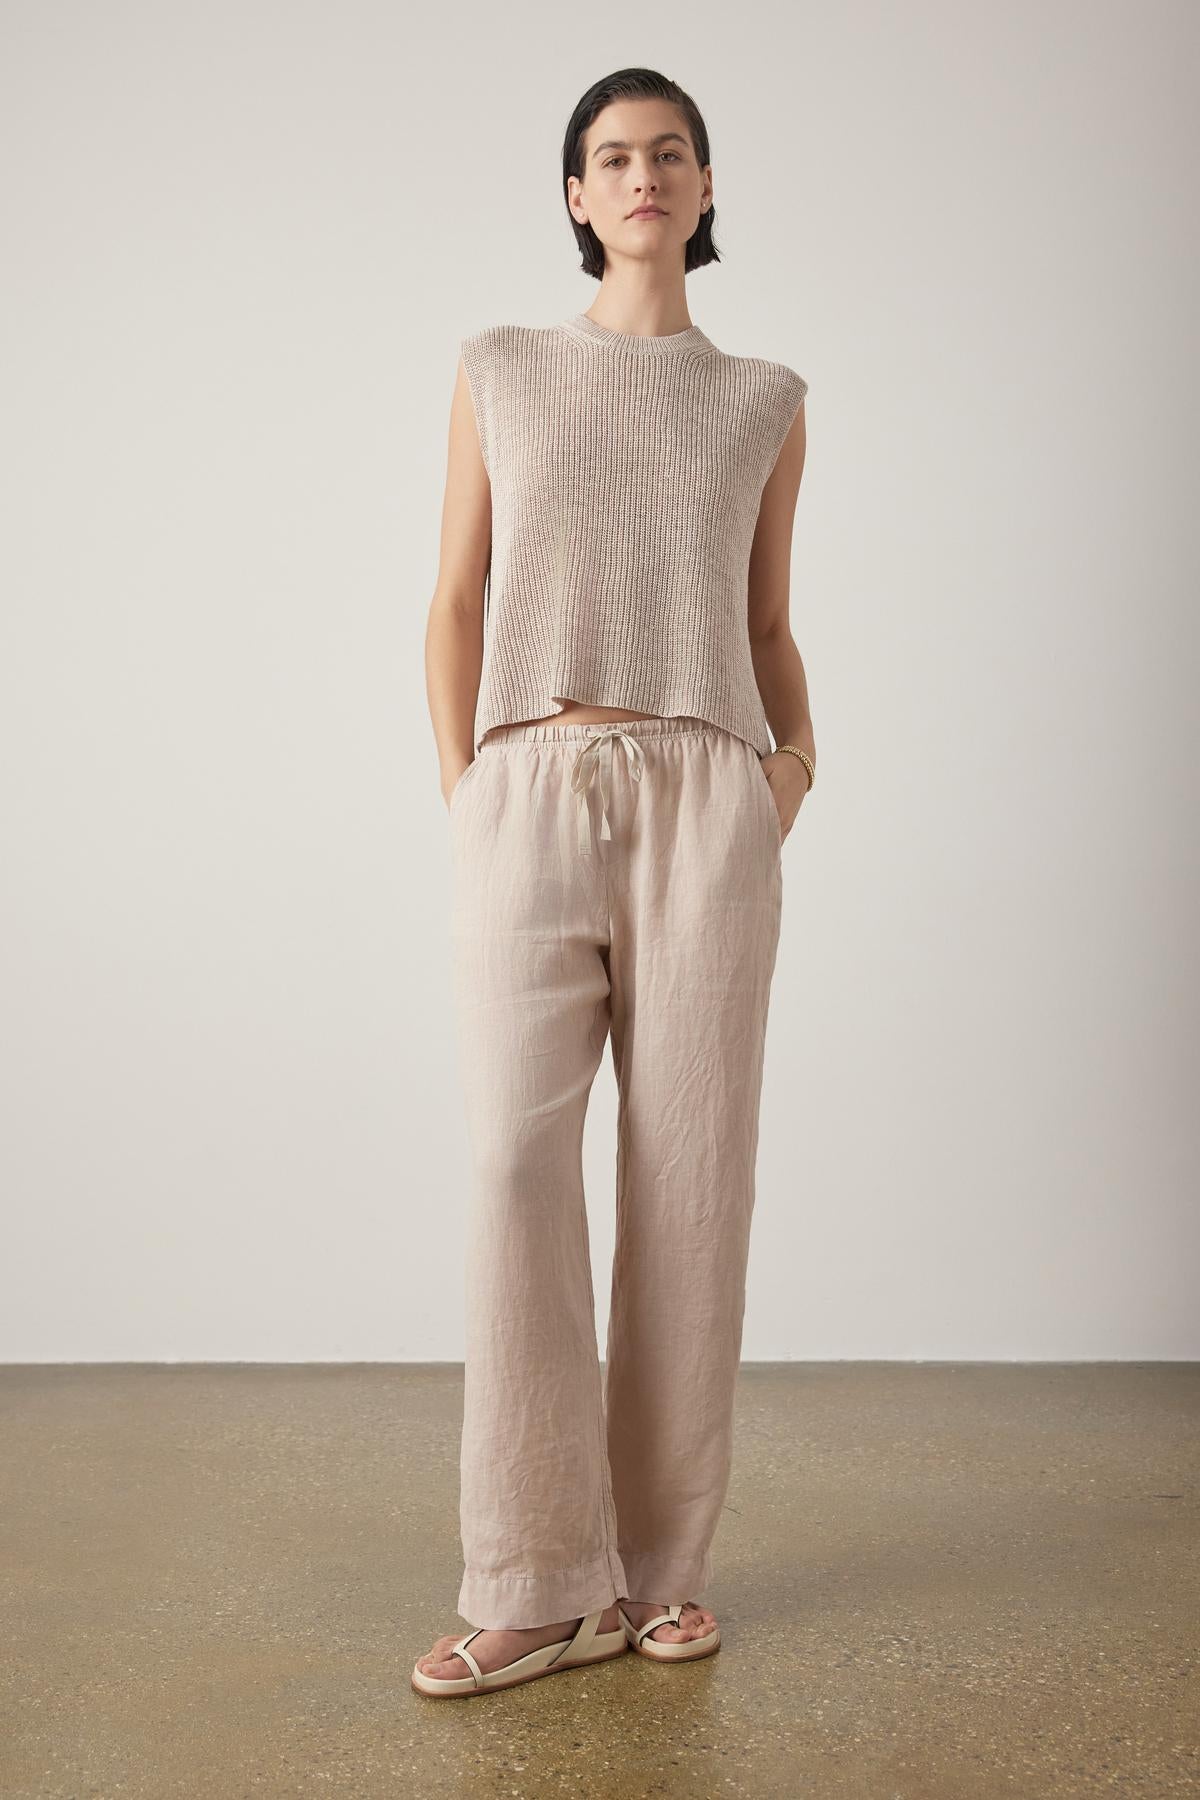 Woman standing in a neutral setting, wearing a sleeveless beige top, Velvet by Jenny Graham PICO LINEN PANTS, and sandals, with a slight smile and hands at sides.-36863287492801